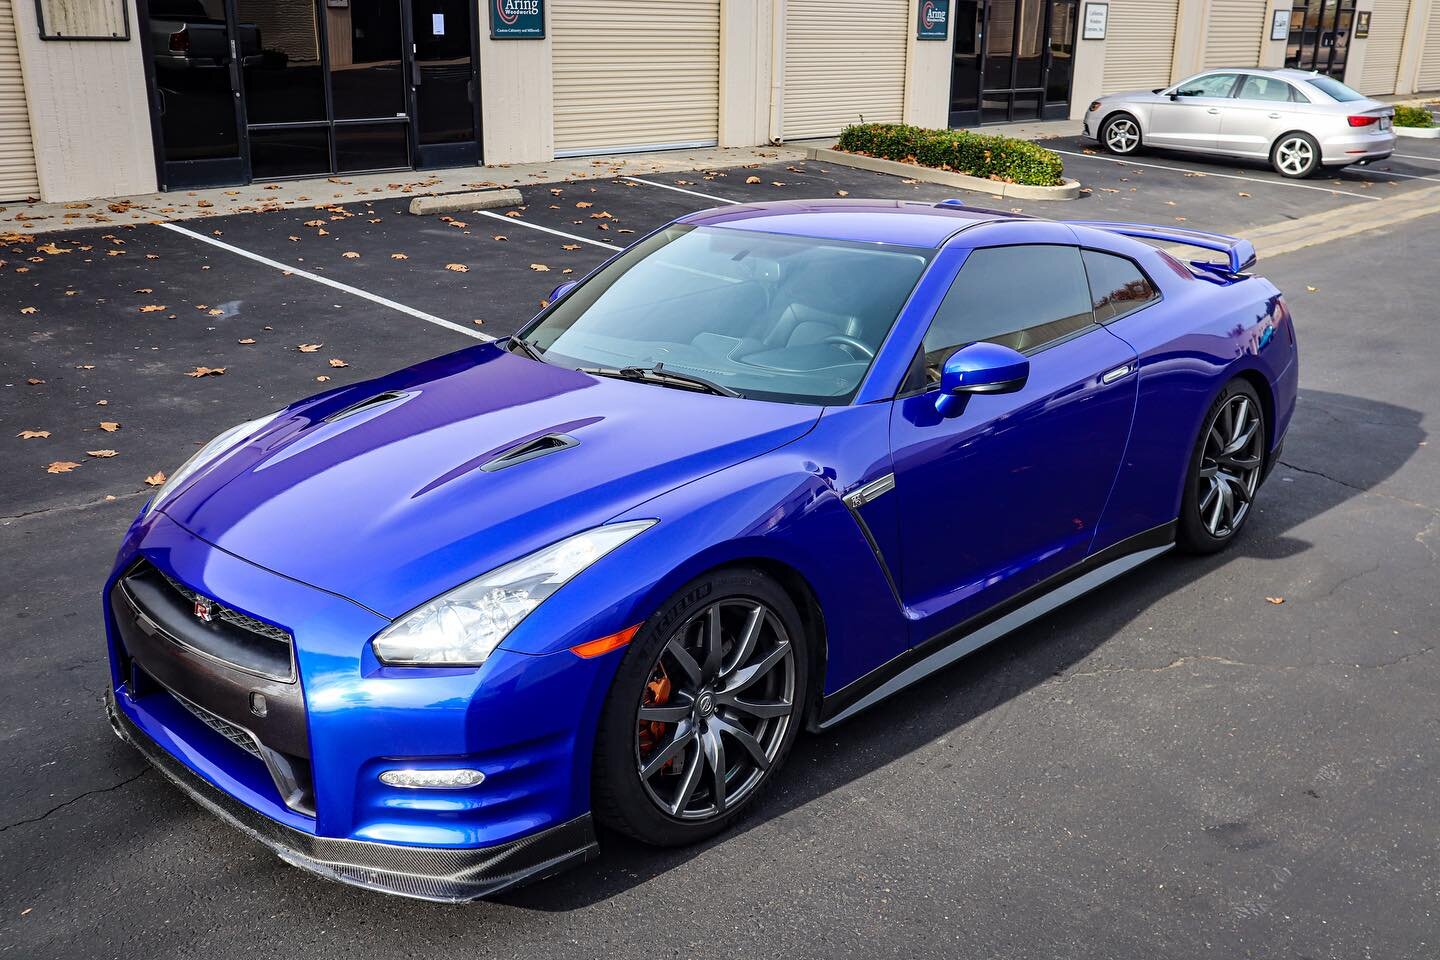 Still stun to know that we did this GTR and it came out 🔥!
.
#driftwraps #gtr #gtr35 #r35 #nissan #wrap #wraps #ranchocordova #wrapshop #wrapped #paintisdead